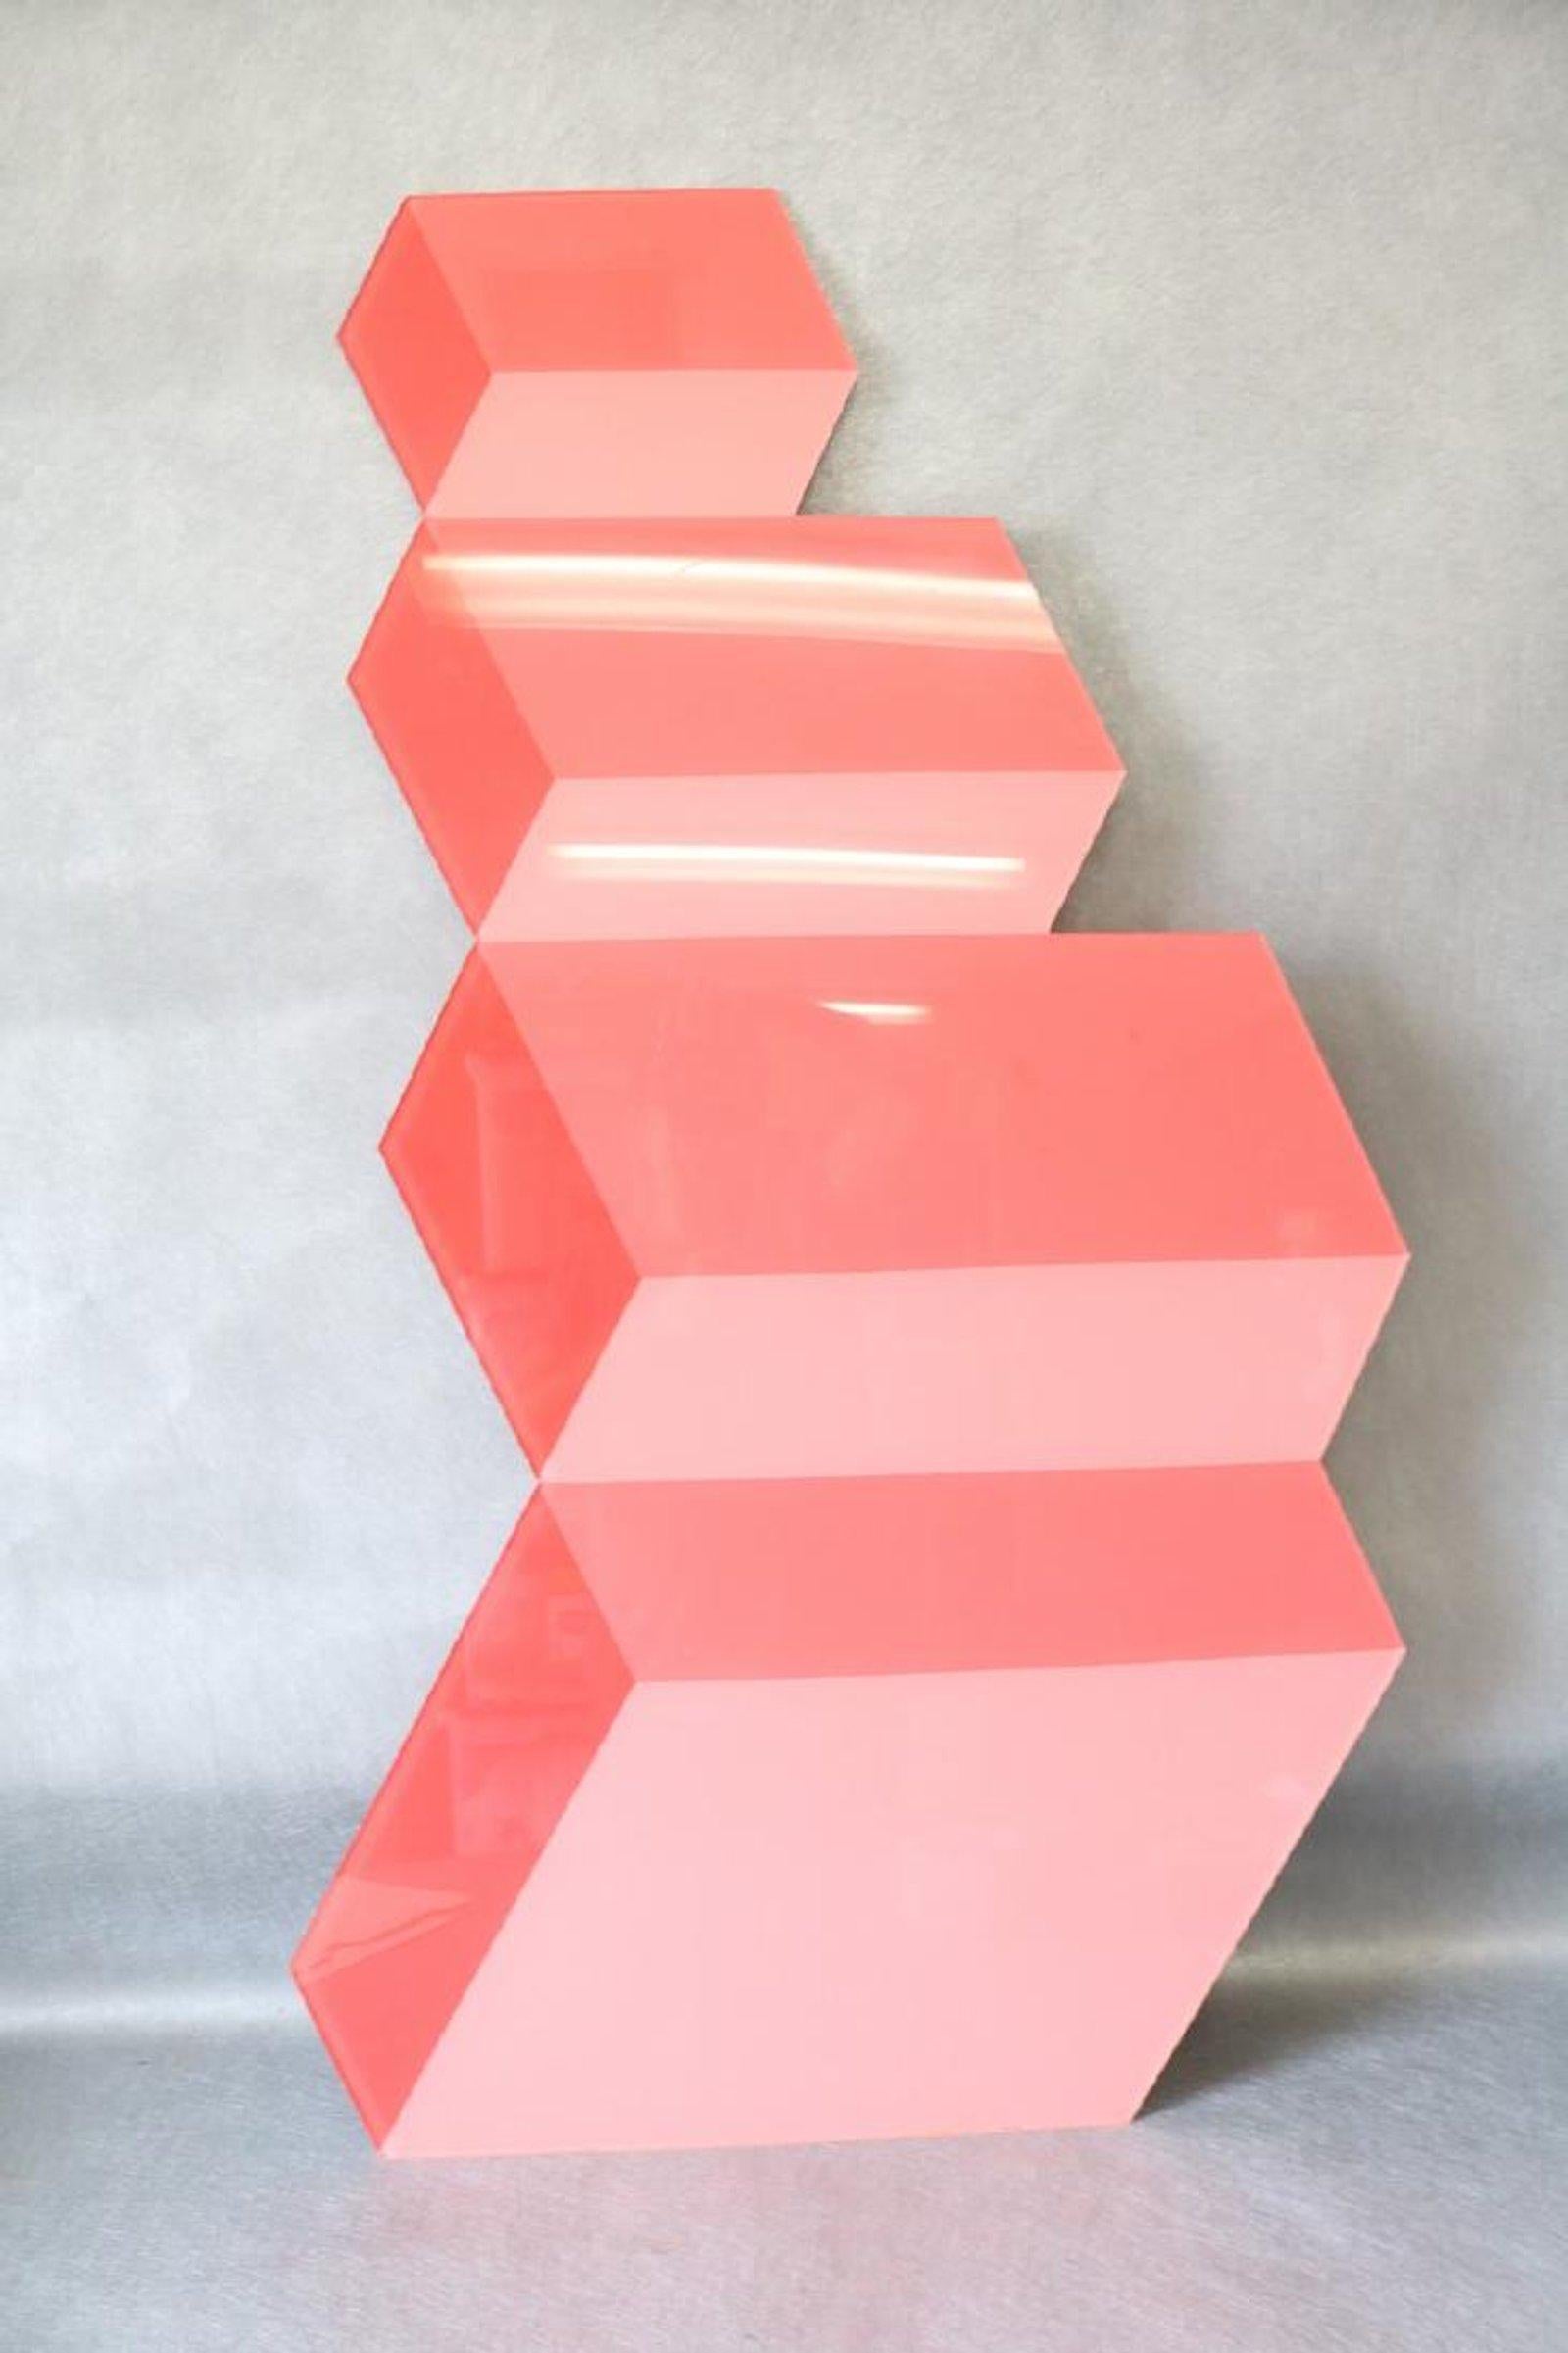 Post-Modern 1971 ‘’Lift Off” Monumental Hard-Edge Geometric Abstract Painting on Lucite